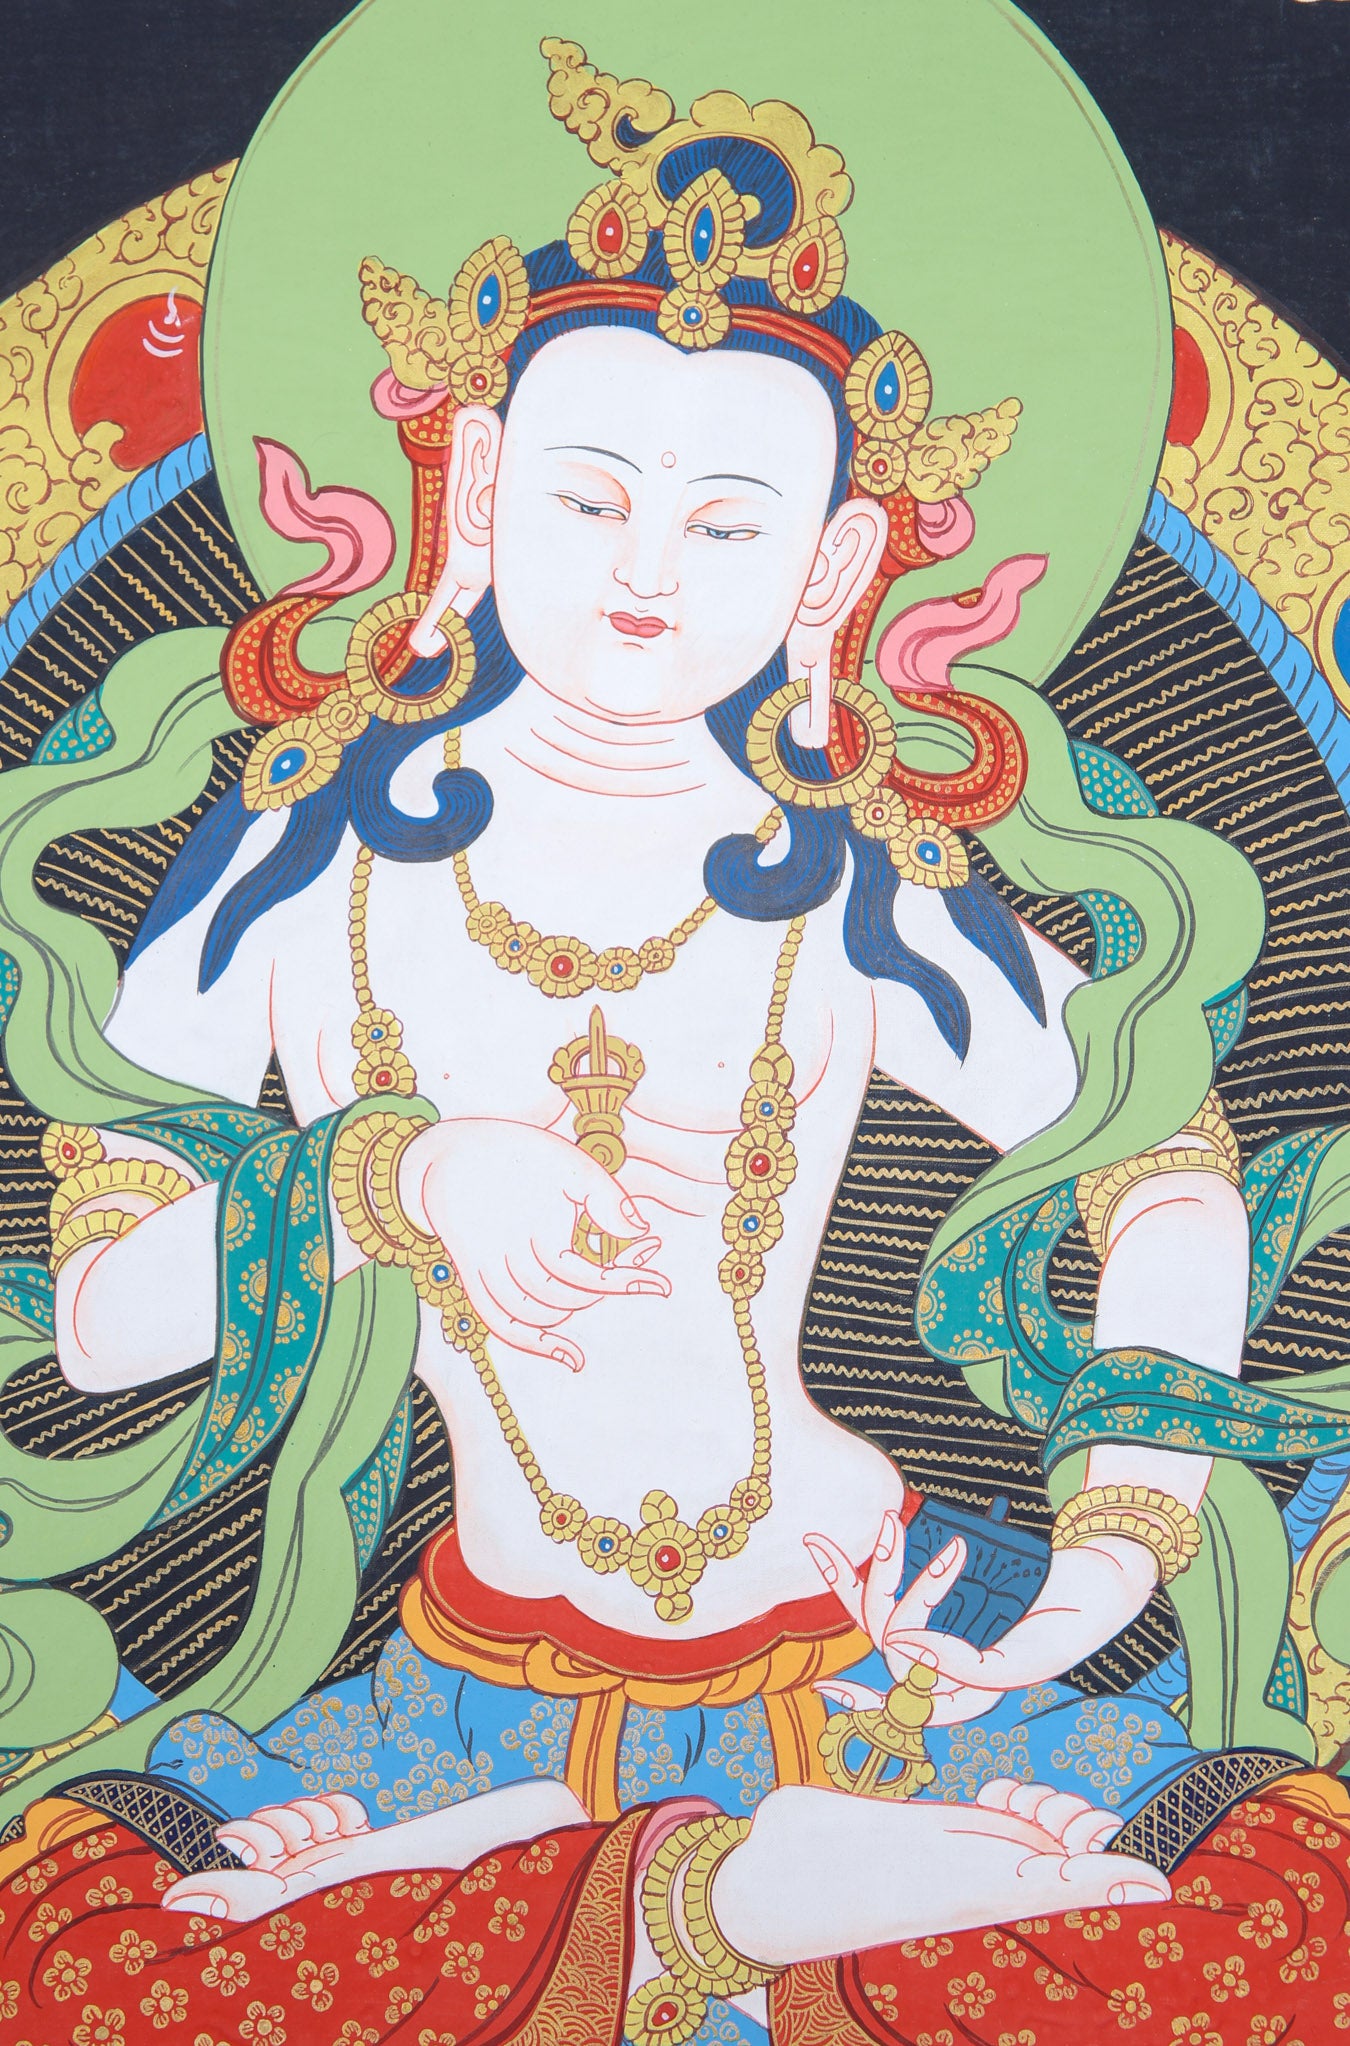 Vajrasattva Thangka Painting for purification practices.